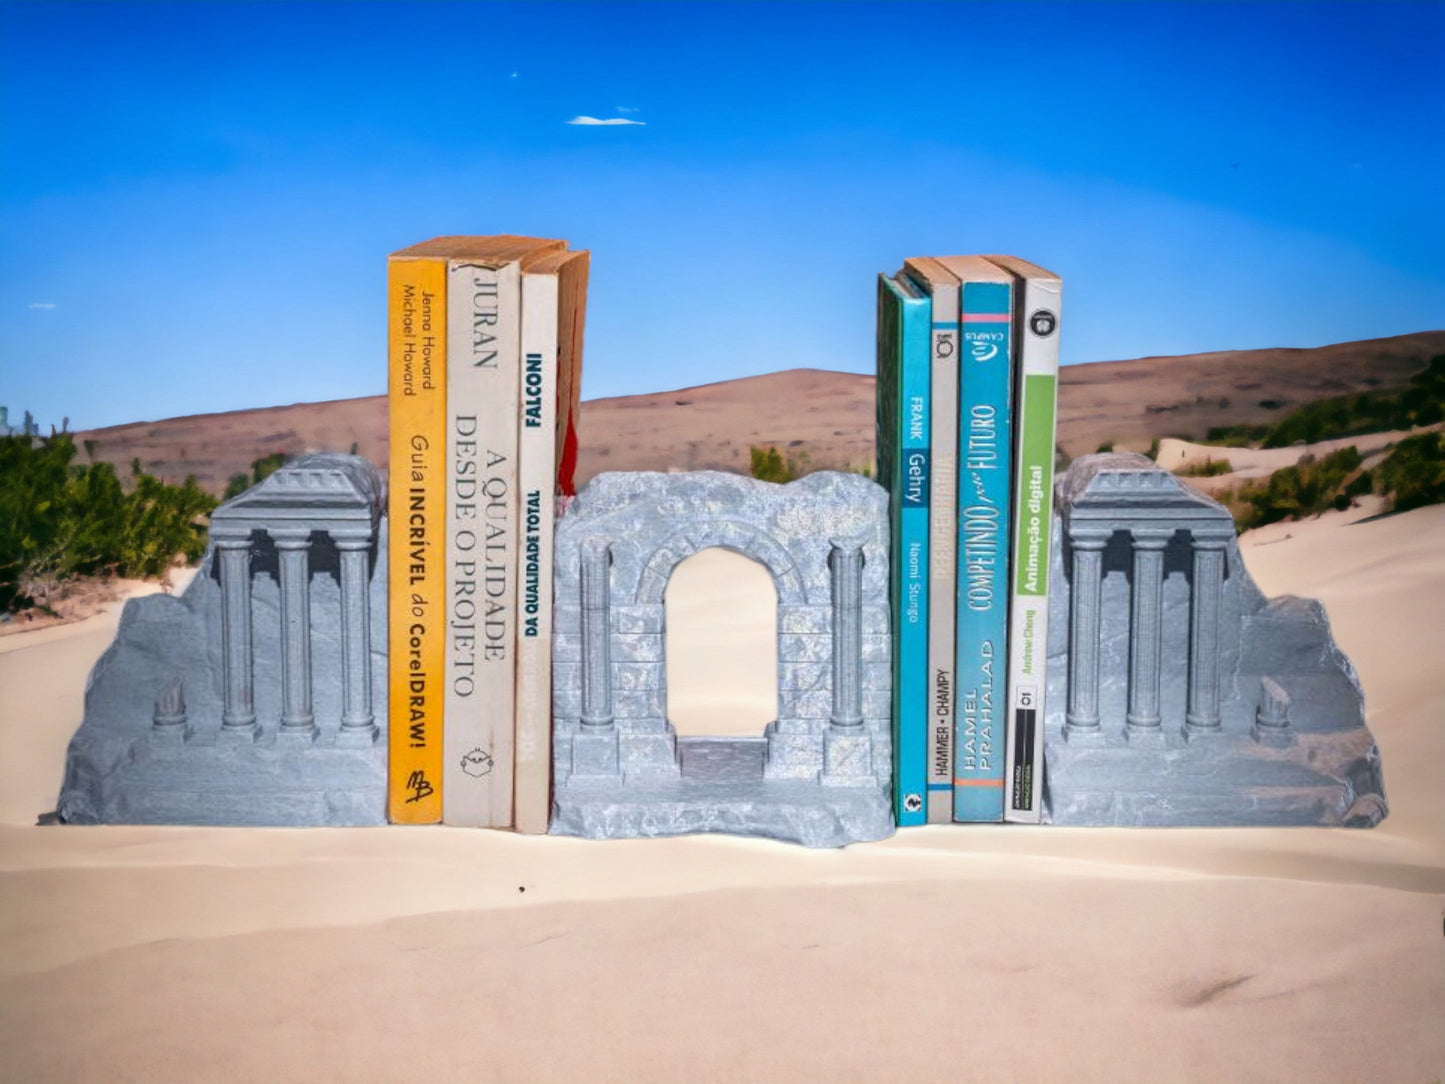 Ruined Bookends 3D Printed  - Quirky Urban Decor for Your Bookshelf or Office